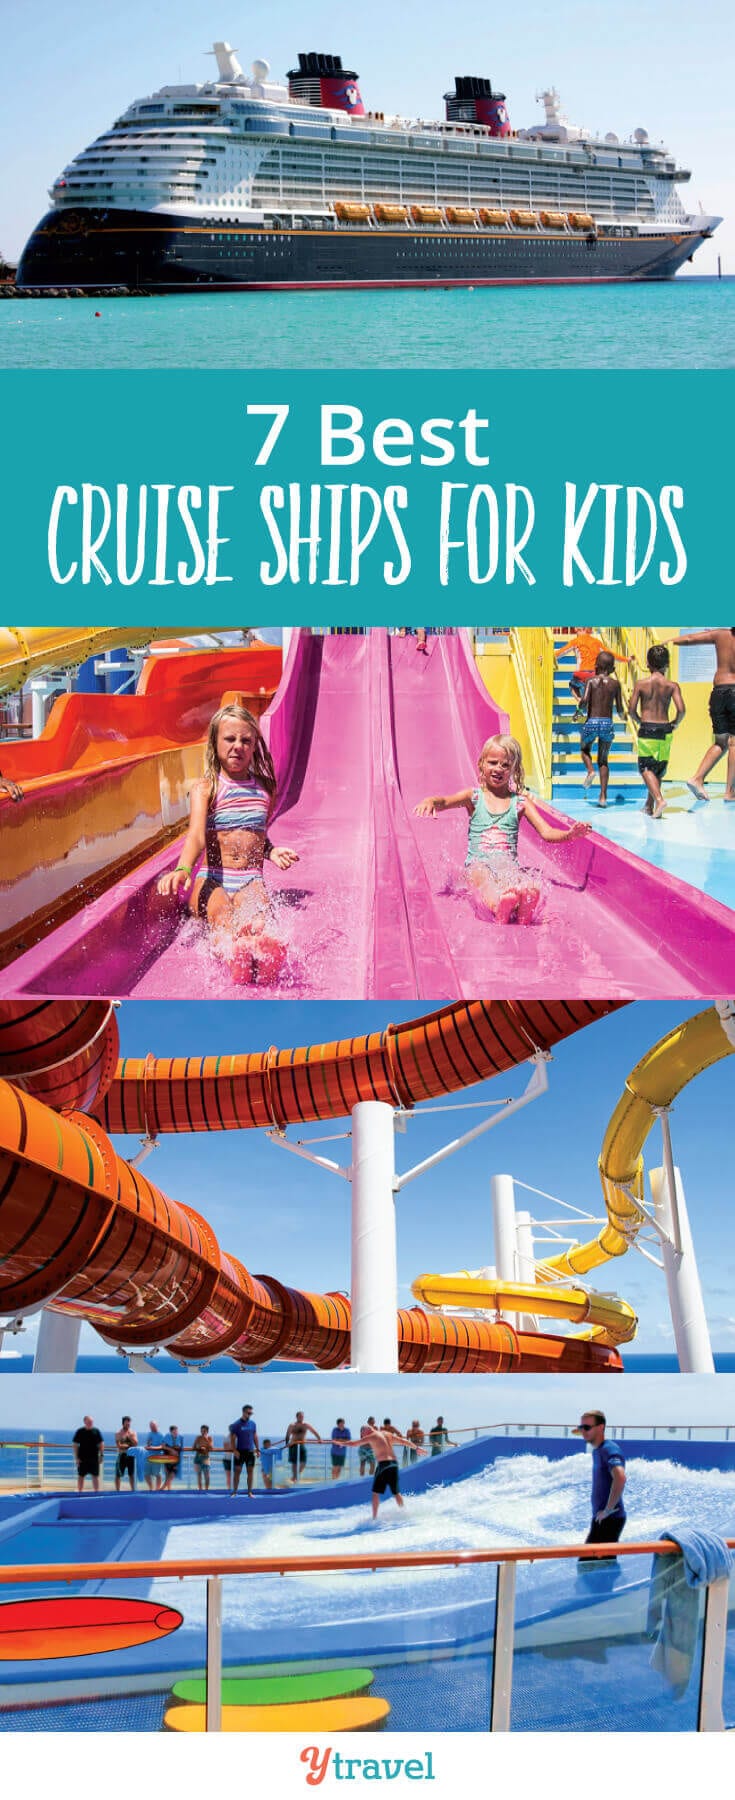 Wondering what the best cruise ships for kids are? 16 year old Lewis has been taking family cruises for years and shares his inside knowledge on the 7 best cruise lines for your next family cruise. #FamilyTravel #cruise #cruises #familycruise